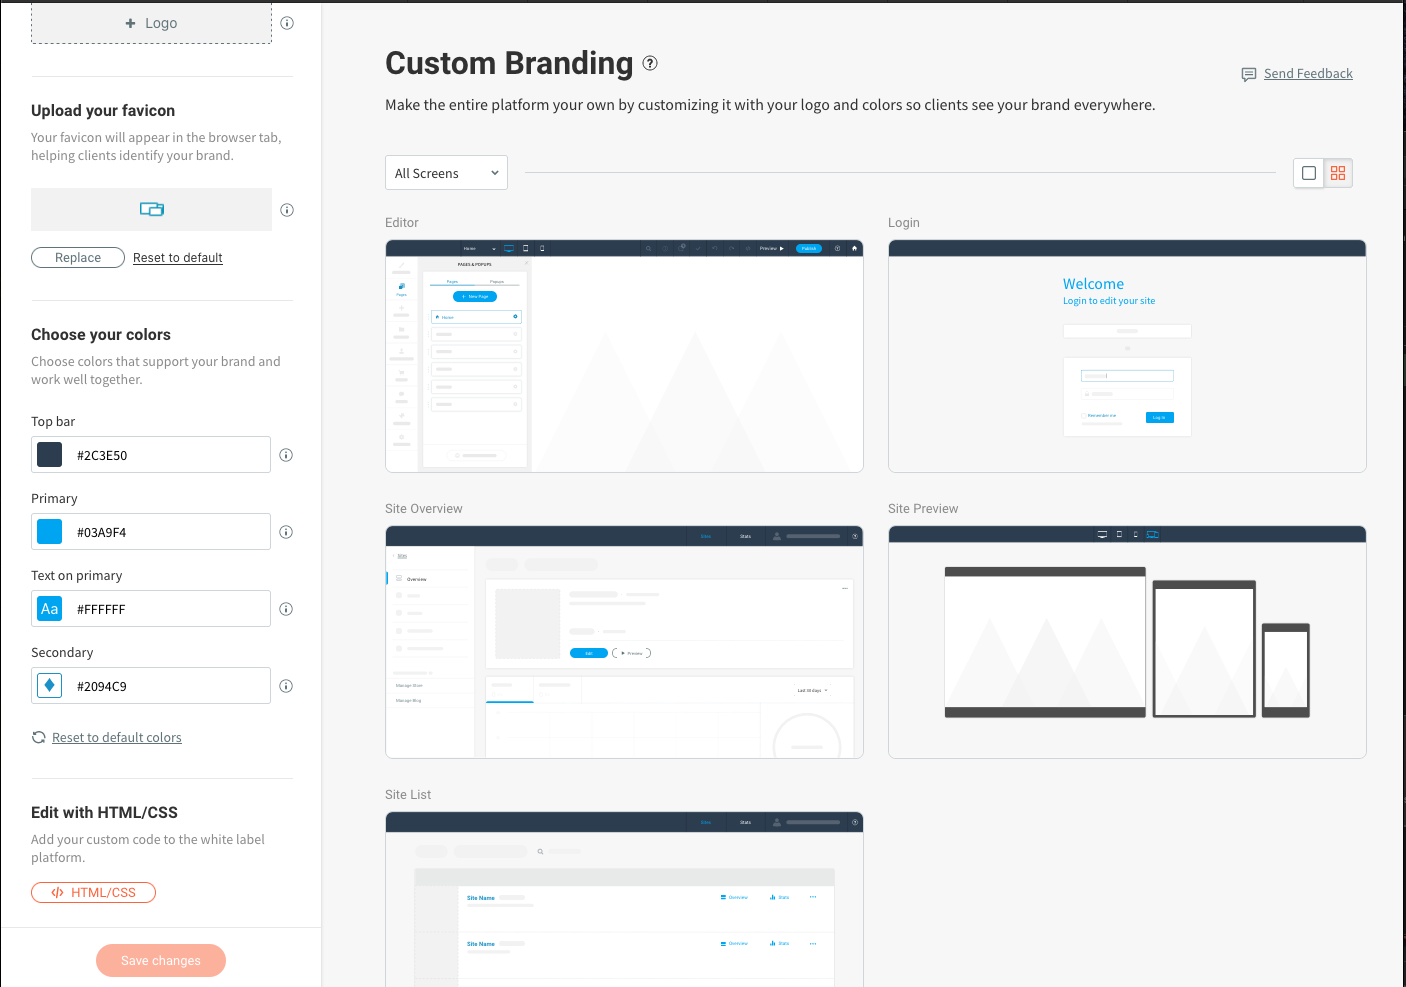 Custom branding UI. The HTML/CSS button can be seen in the lower left corner.